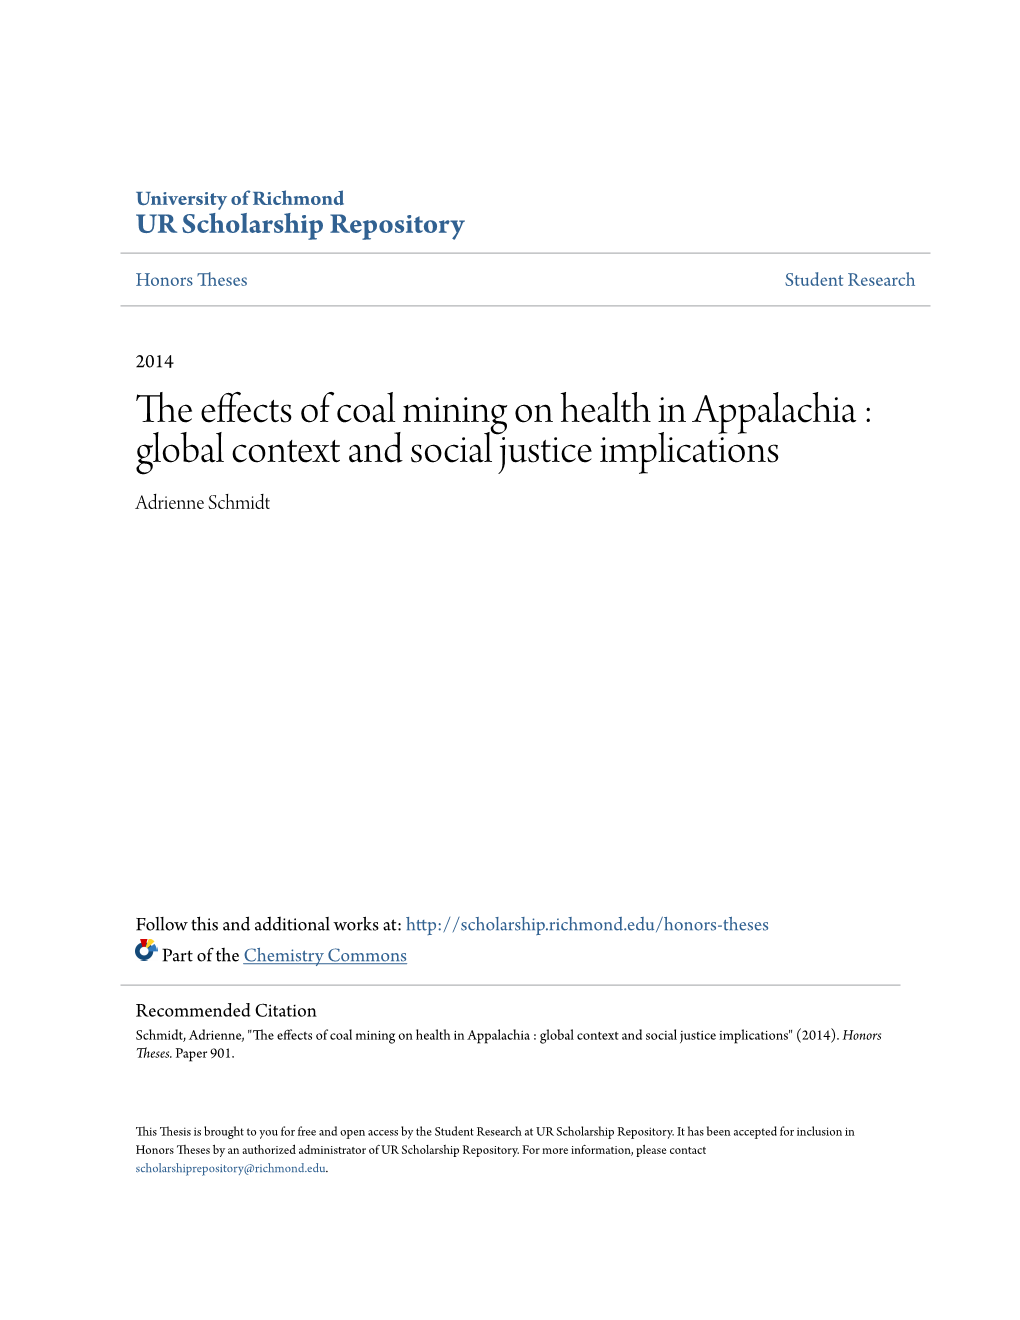 The Effects of Coal Mining on Health in Appalachia : Global Context and Social Justice Implications Adrienne Schmidt